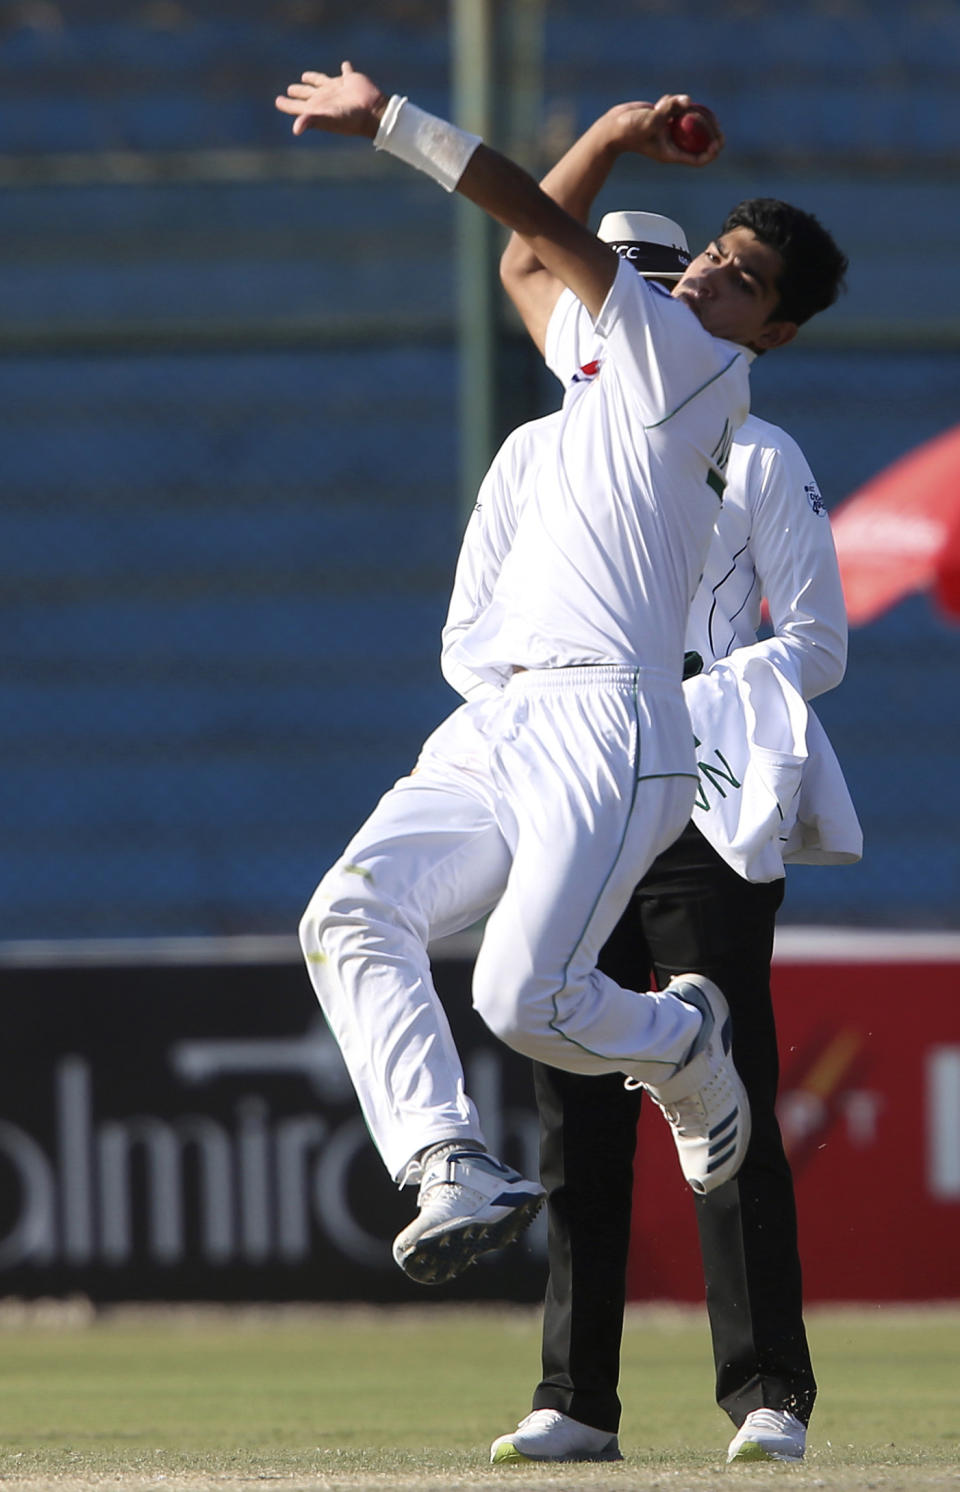 Pakistani bowler Naseem Shah in action against Sri Lanka during the second Test in Karachi, Pakistan, Sunday, Dec. 22, 2019. Pakistan continued to take the second test away from Sri Lanka with yet another record-making day, reaching 555-3 at lunch on the fourth day and pushing their lead to 475 runs. (AP Photo/Fareed Khan)